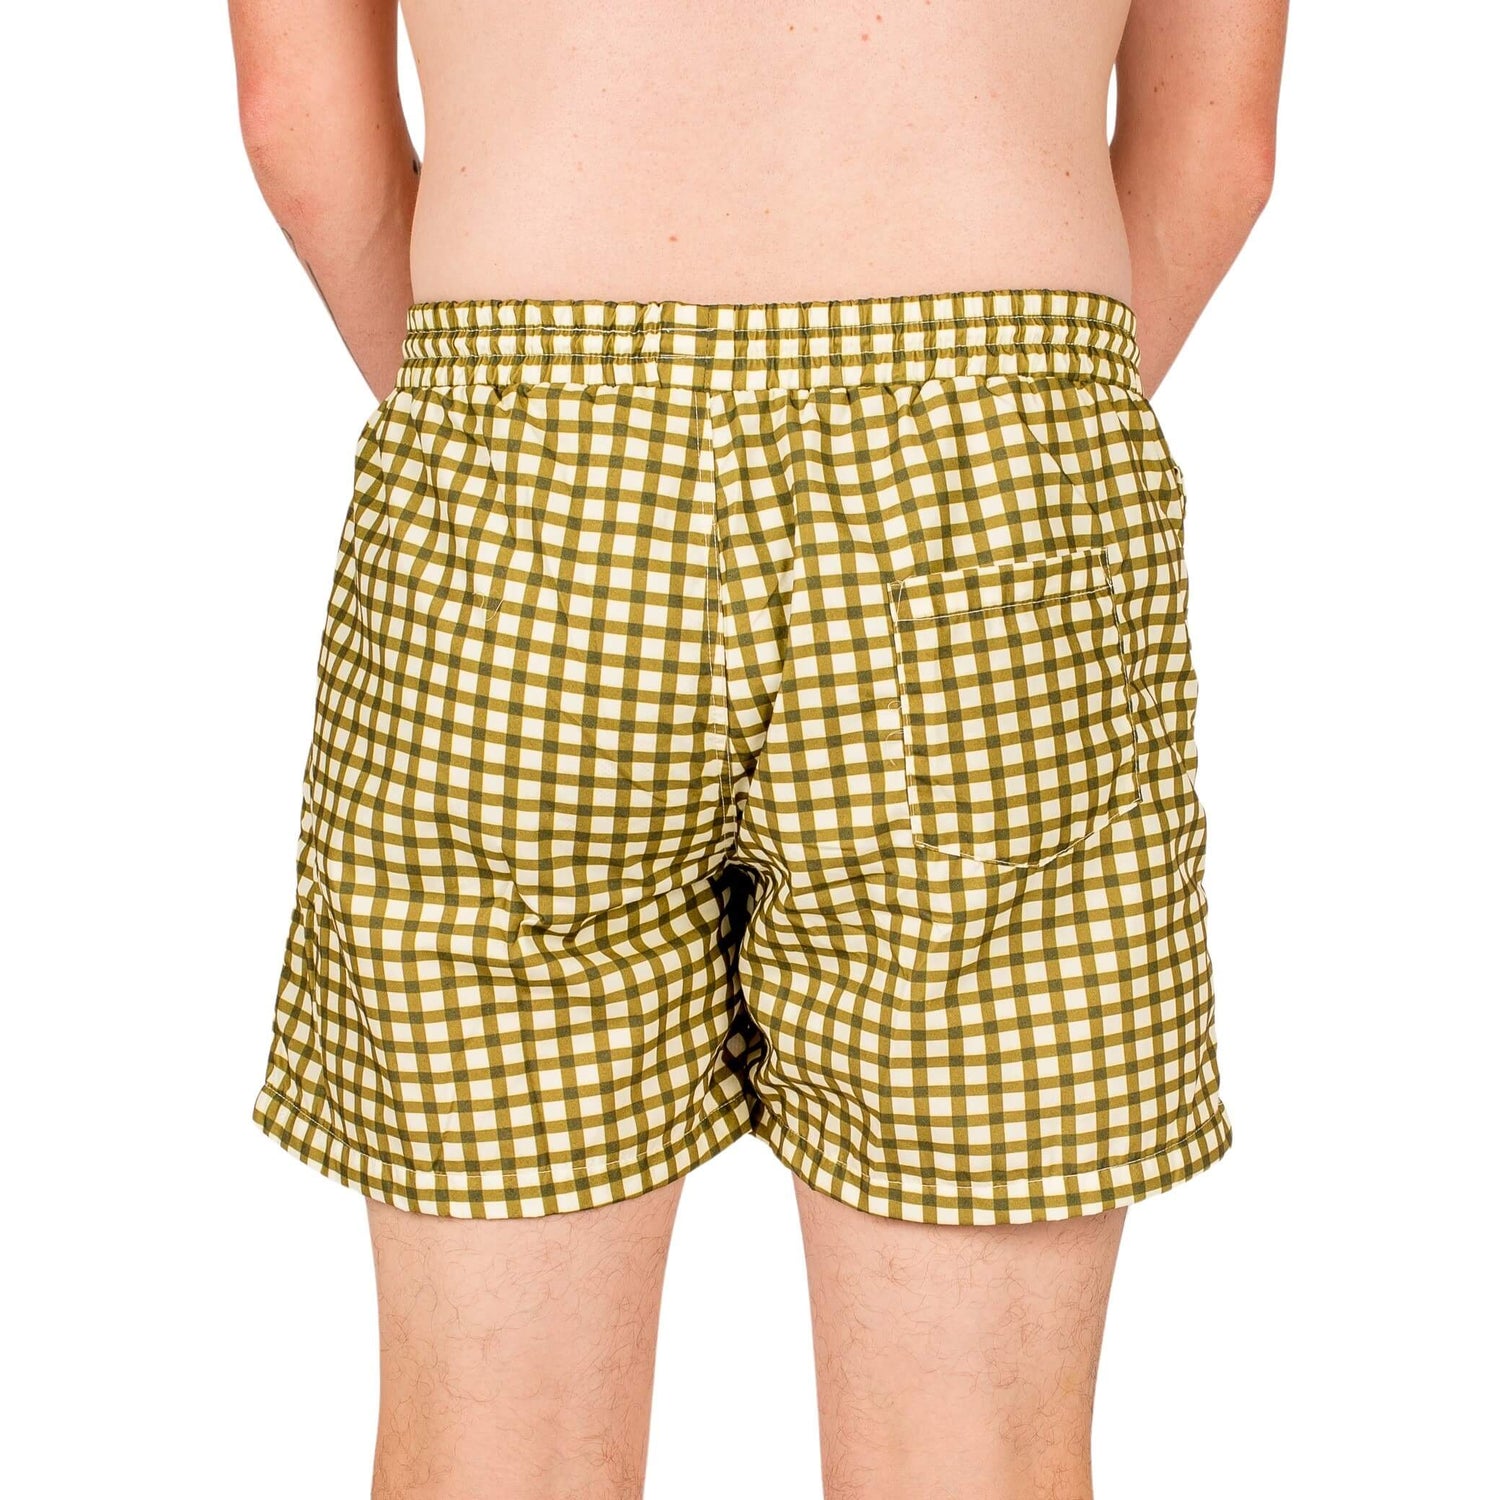 Close up of the rear of Vibrant Hounds Green Gingham swimwear.